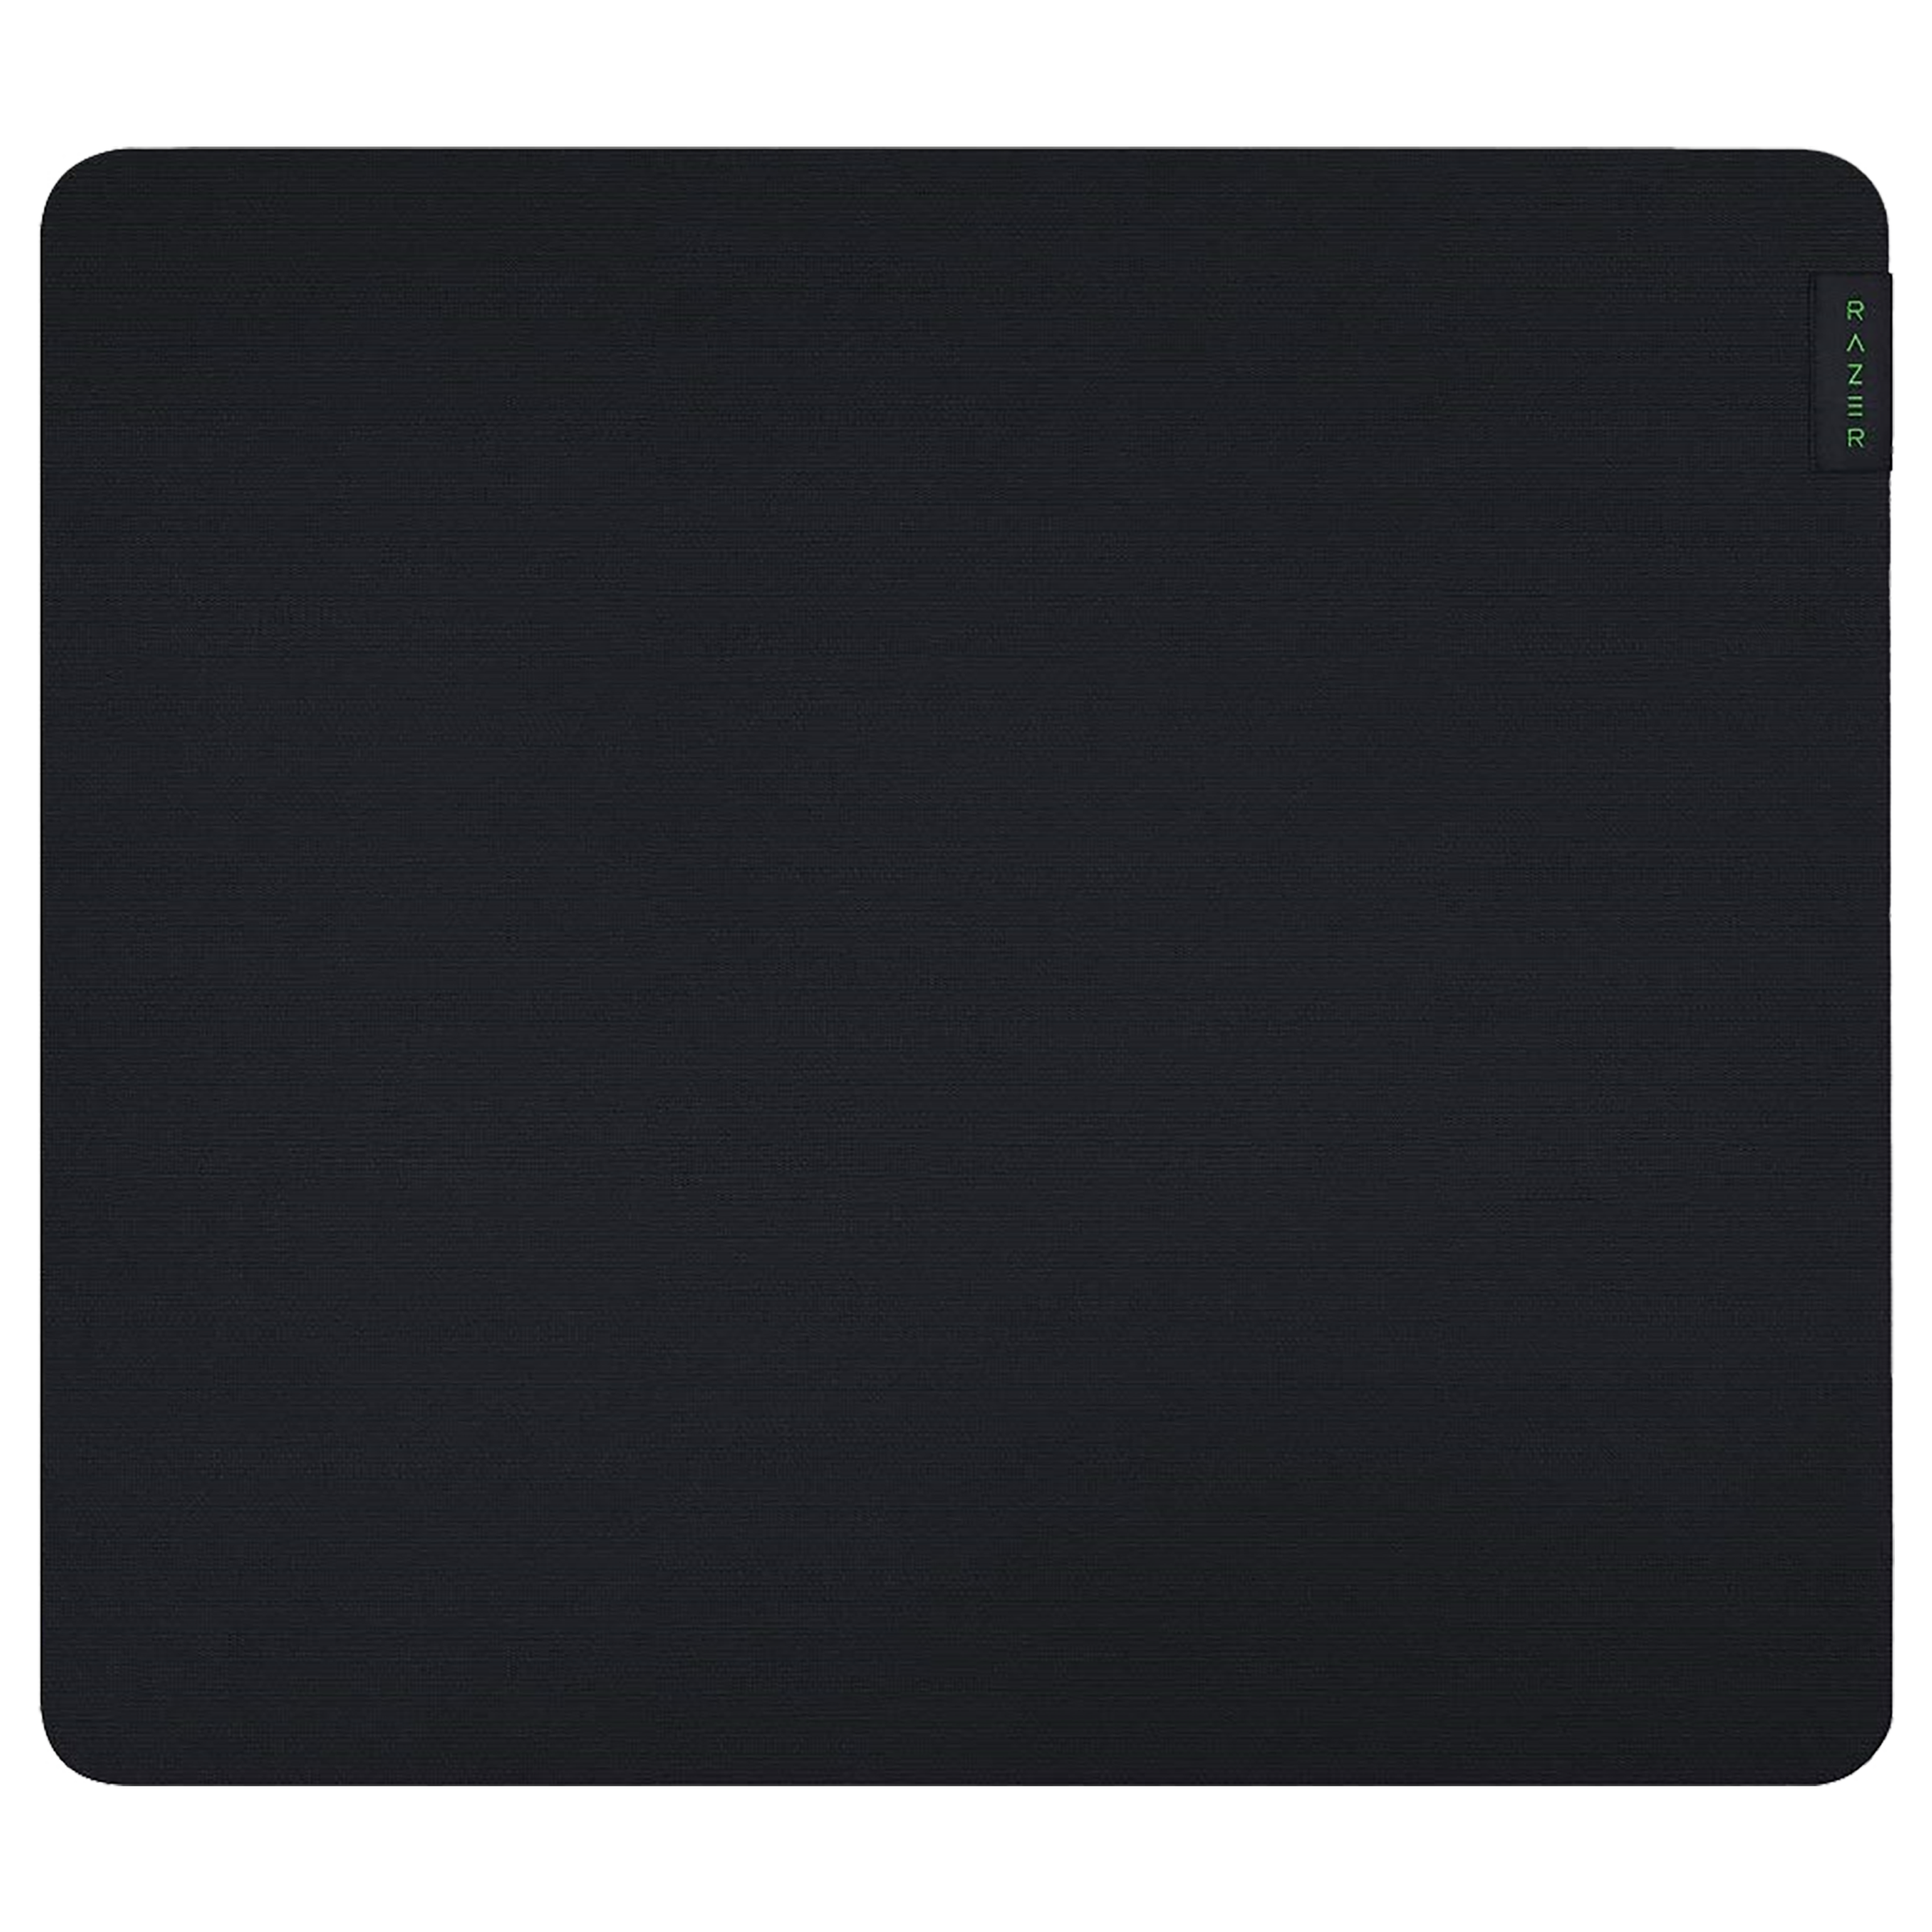 Razer Gigantus Mouse Pad For Mouse (Thick, High-Density Rubber Foam, RZ02-03330300-R3M1, Black)_1